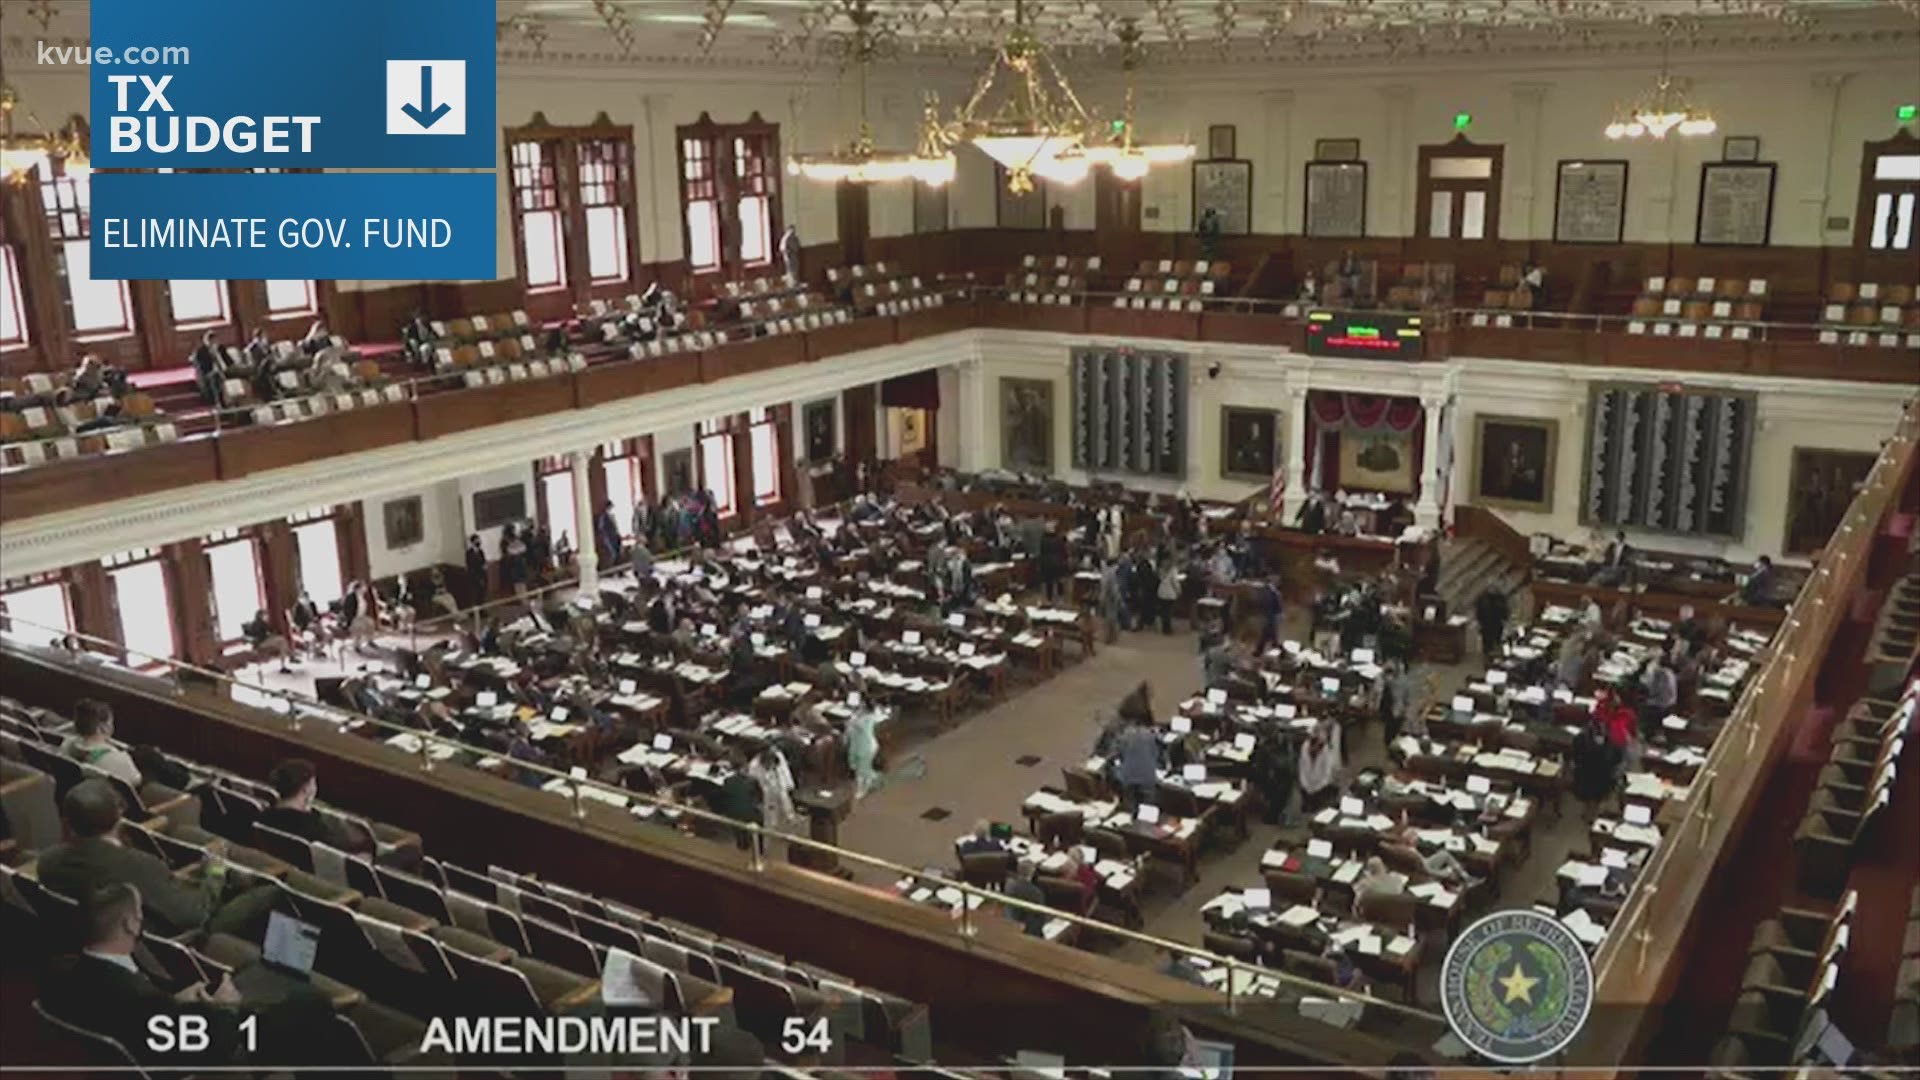 The Texas budget proposal is heading back to the Senate after the House made more than 200 amendments to its original budget. The House passed its version Thursday.